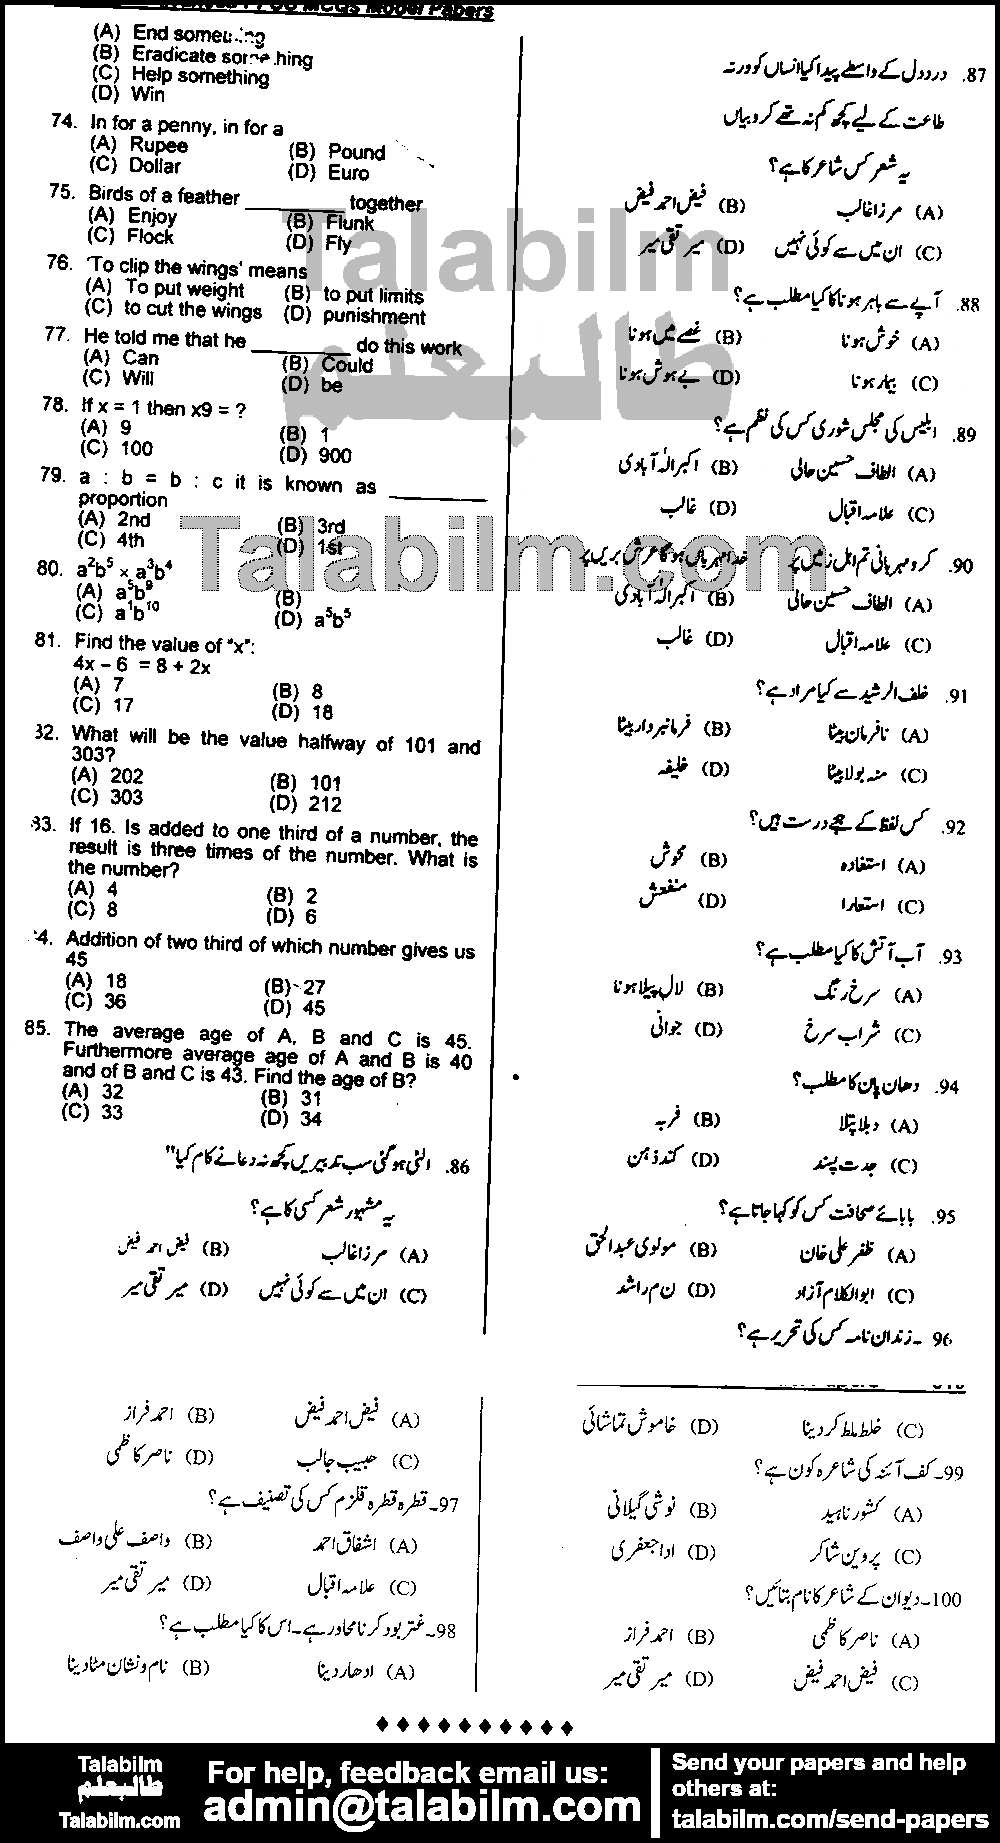 Social Security Officer 0 past paper for 2018 Page No. 4